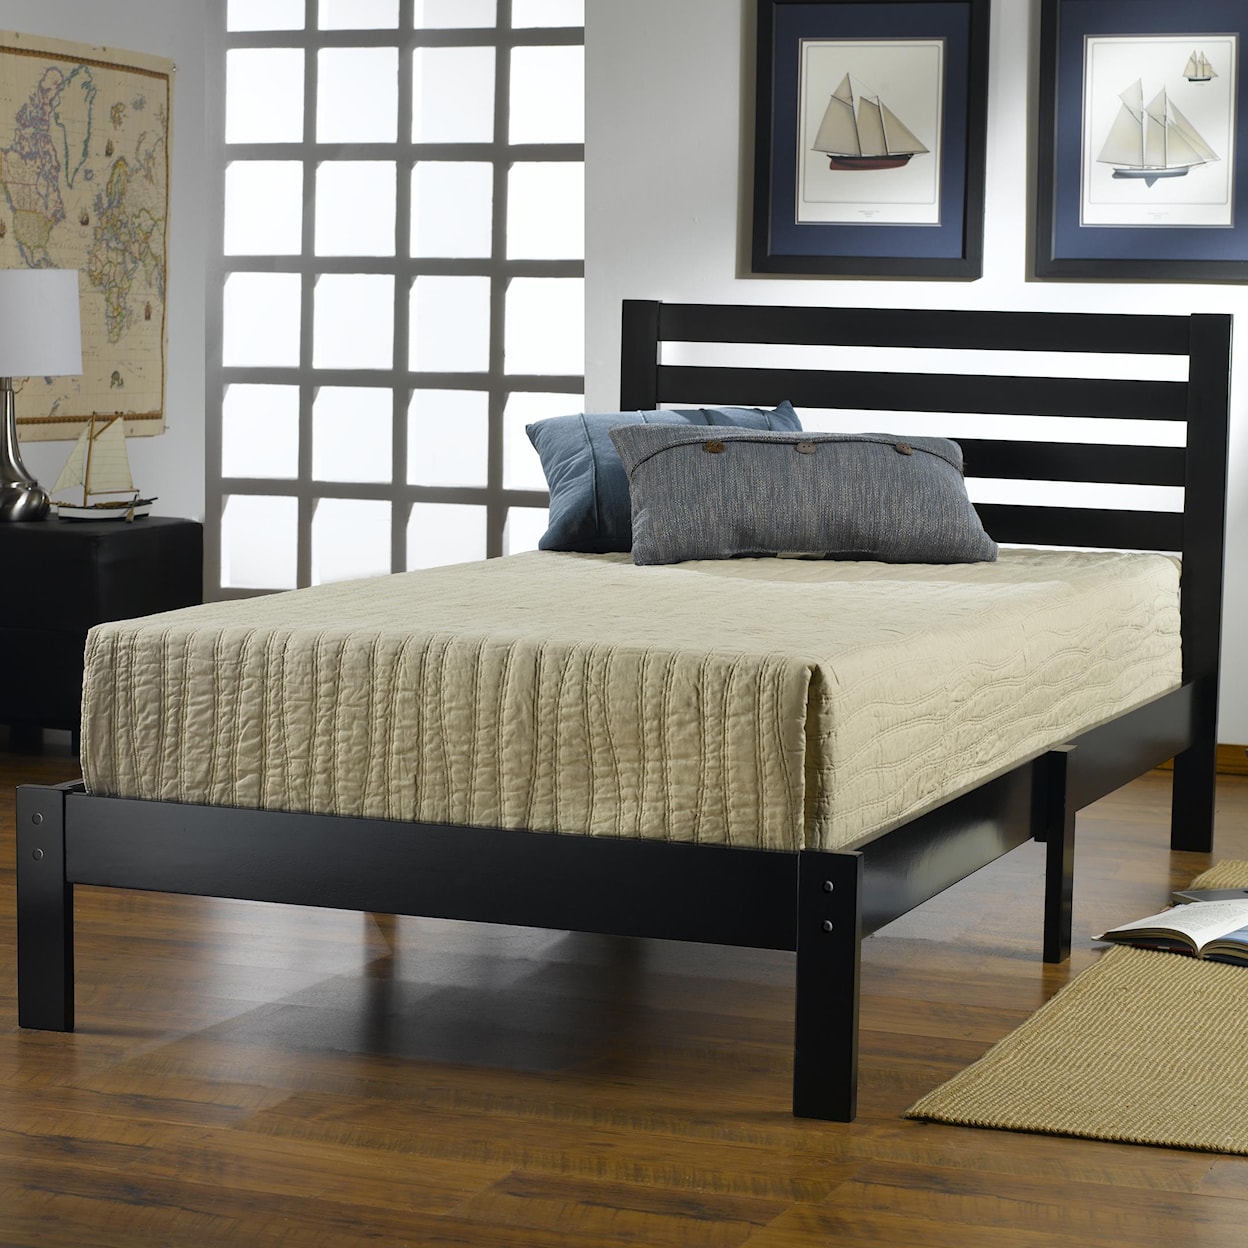 Hillsdale Wood Beds Twin Bed Set